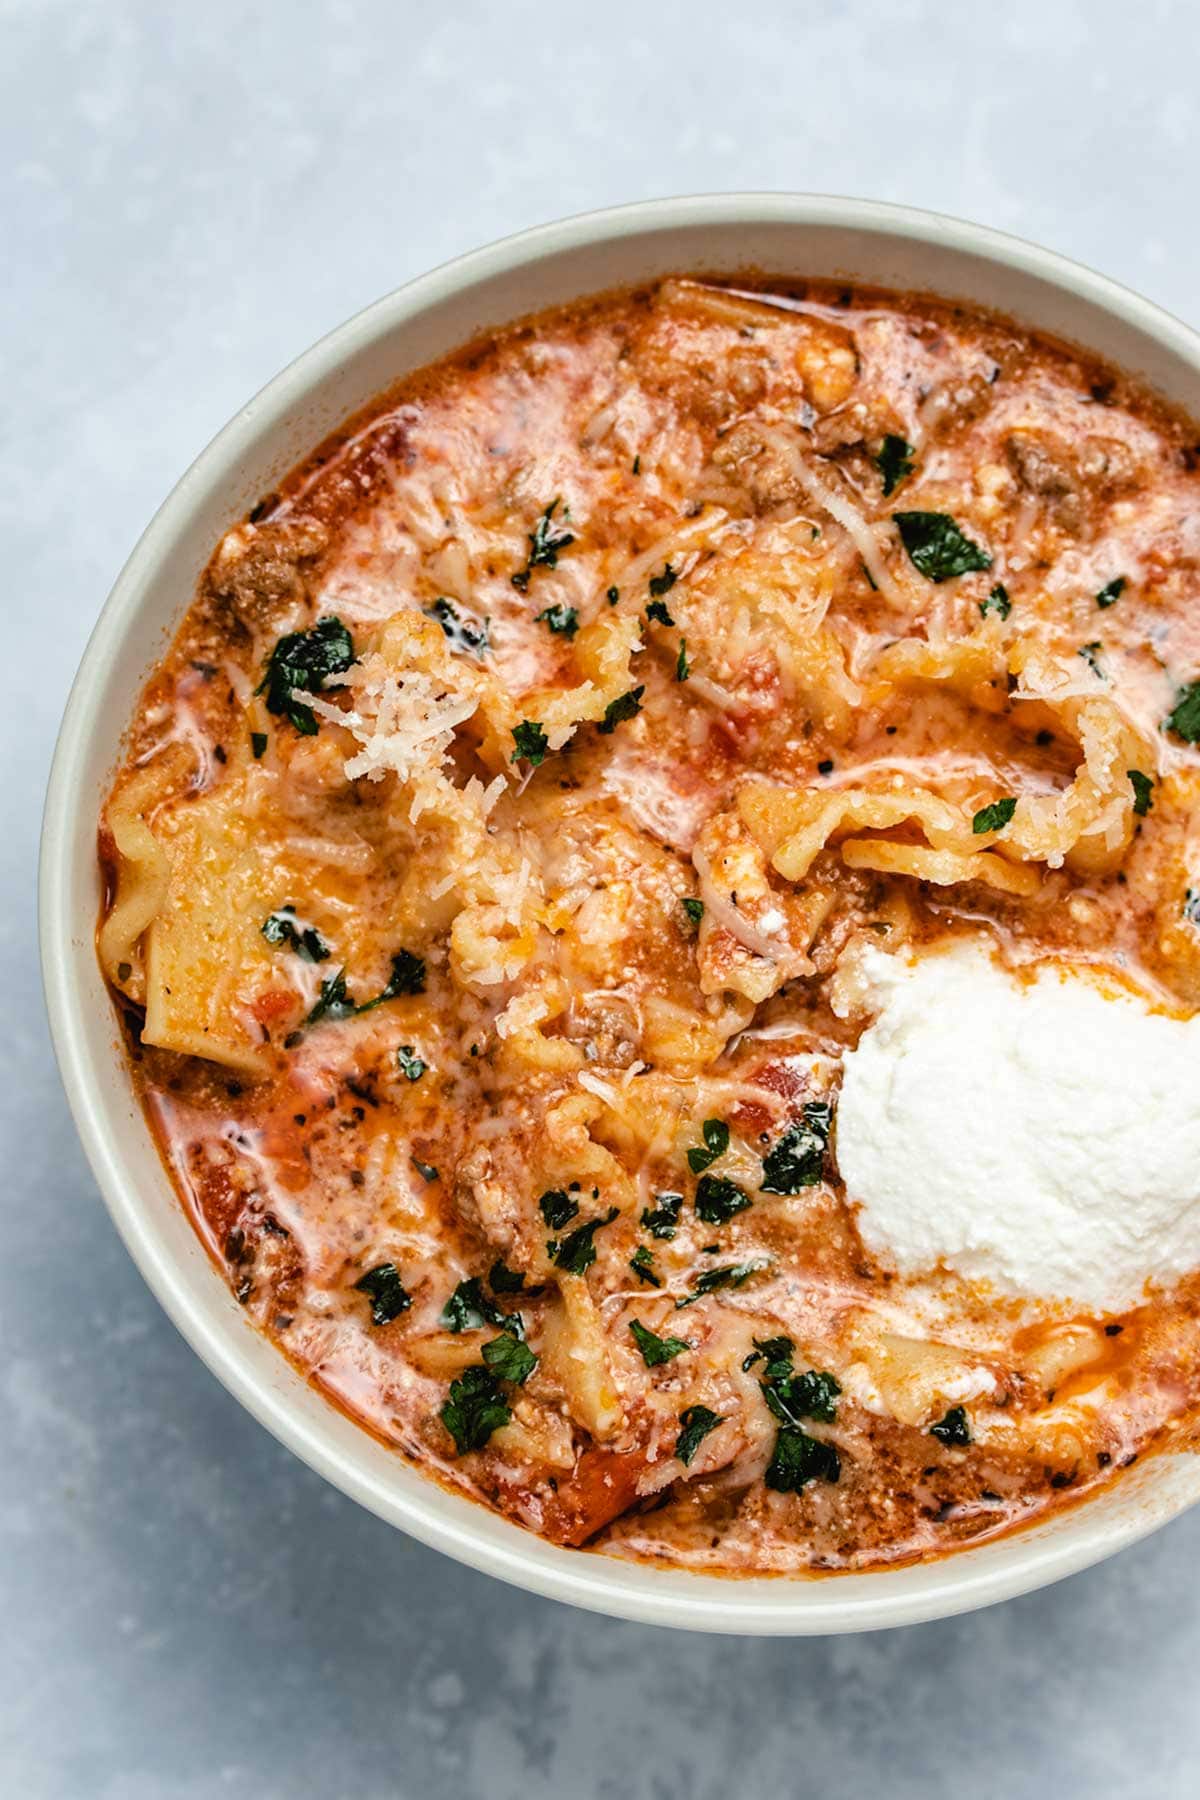 Lasagna soup in a beige bowl garnished with parsley and ricotta cheese viewed from overhead